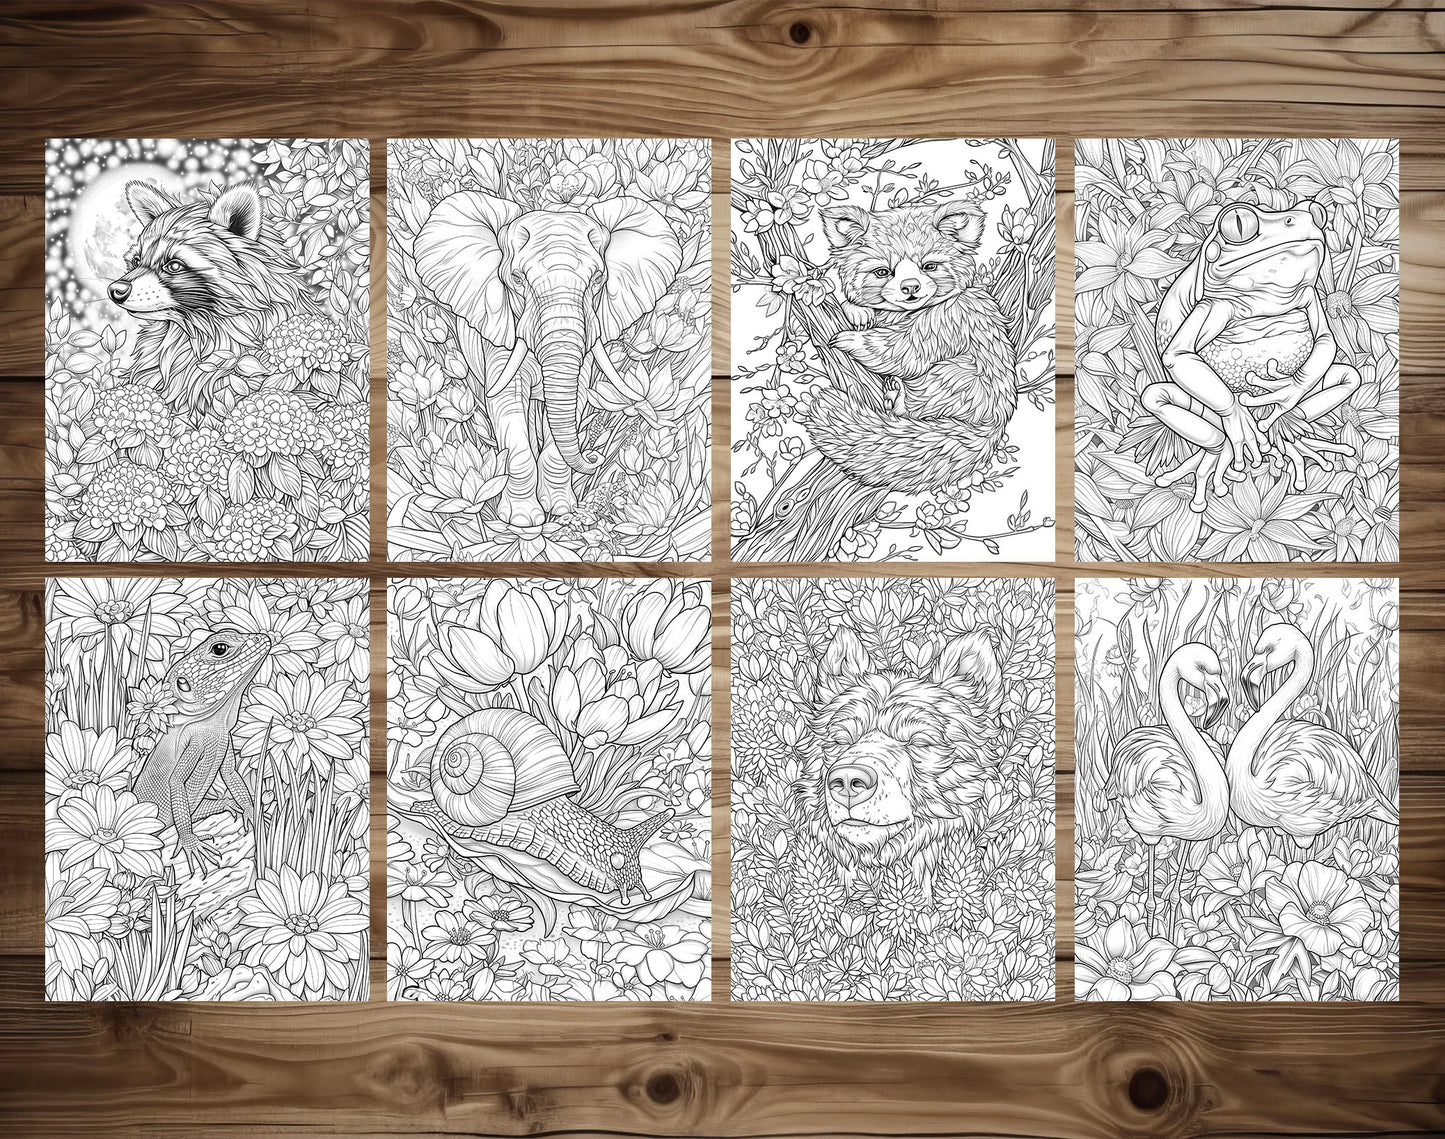 50 Animals & Flowers Coloring Pages  - Instant Download - Printable PDF